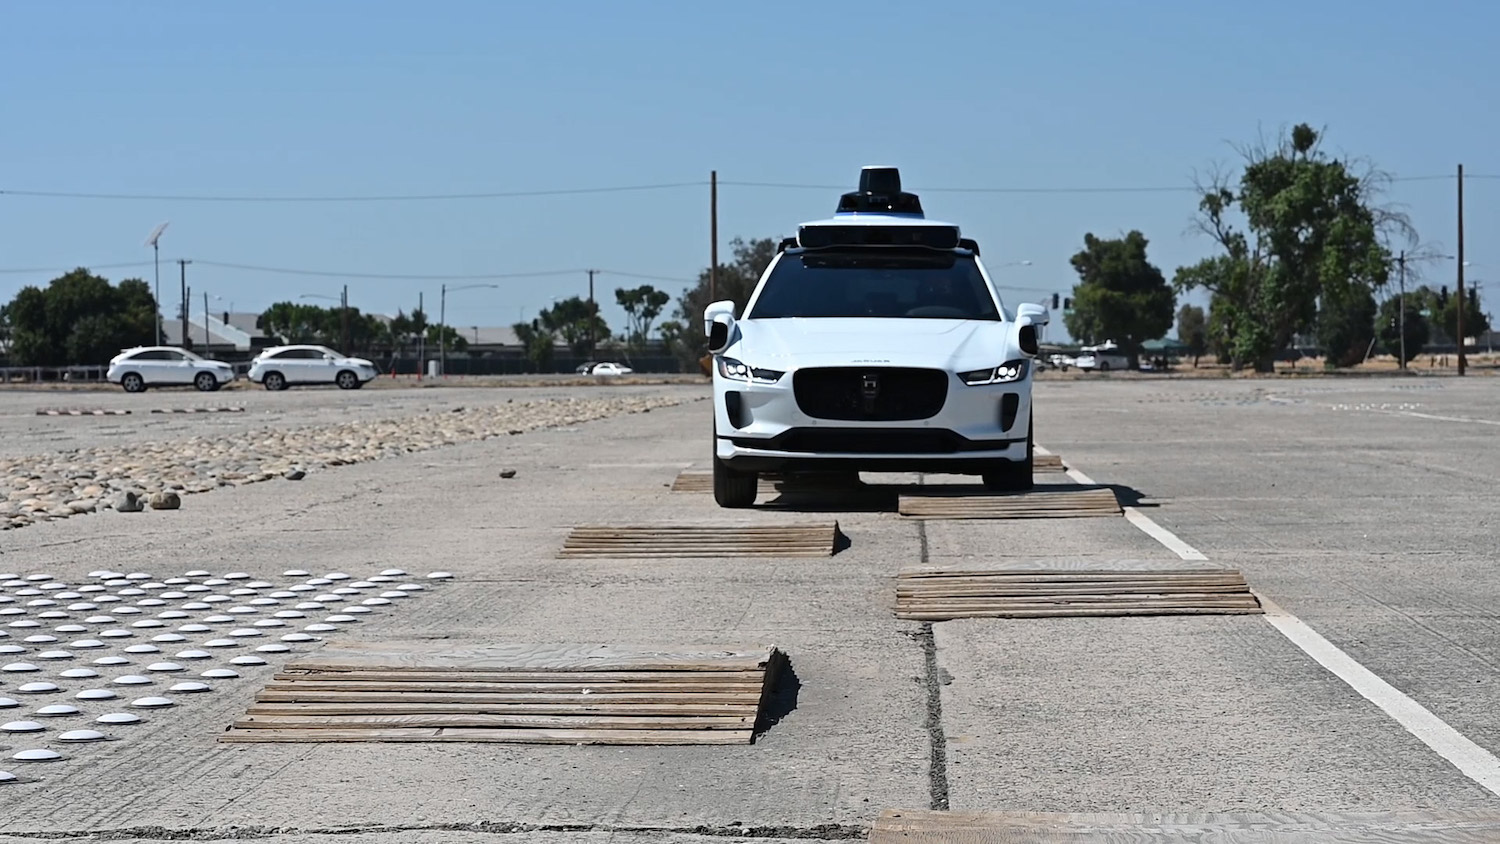 Waymo is investing heavily in UX to build trust in driverless cars.